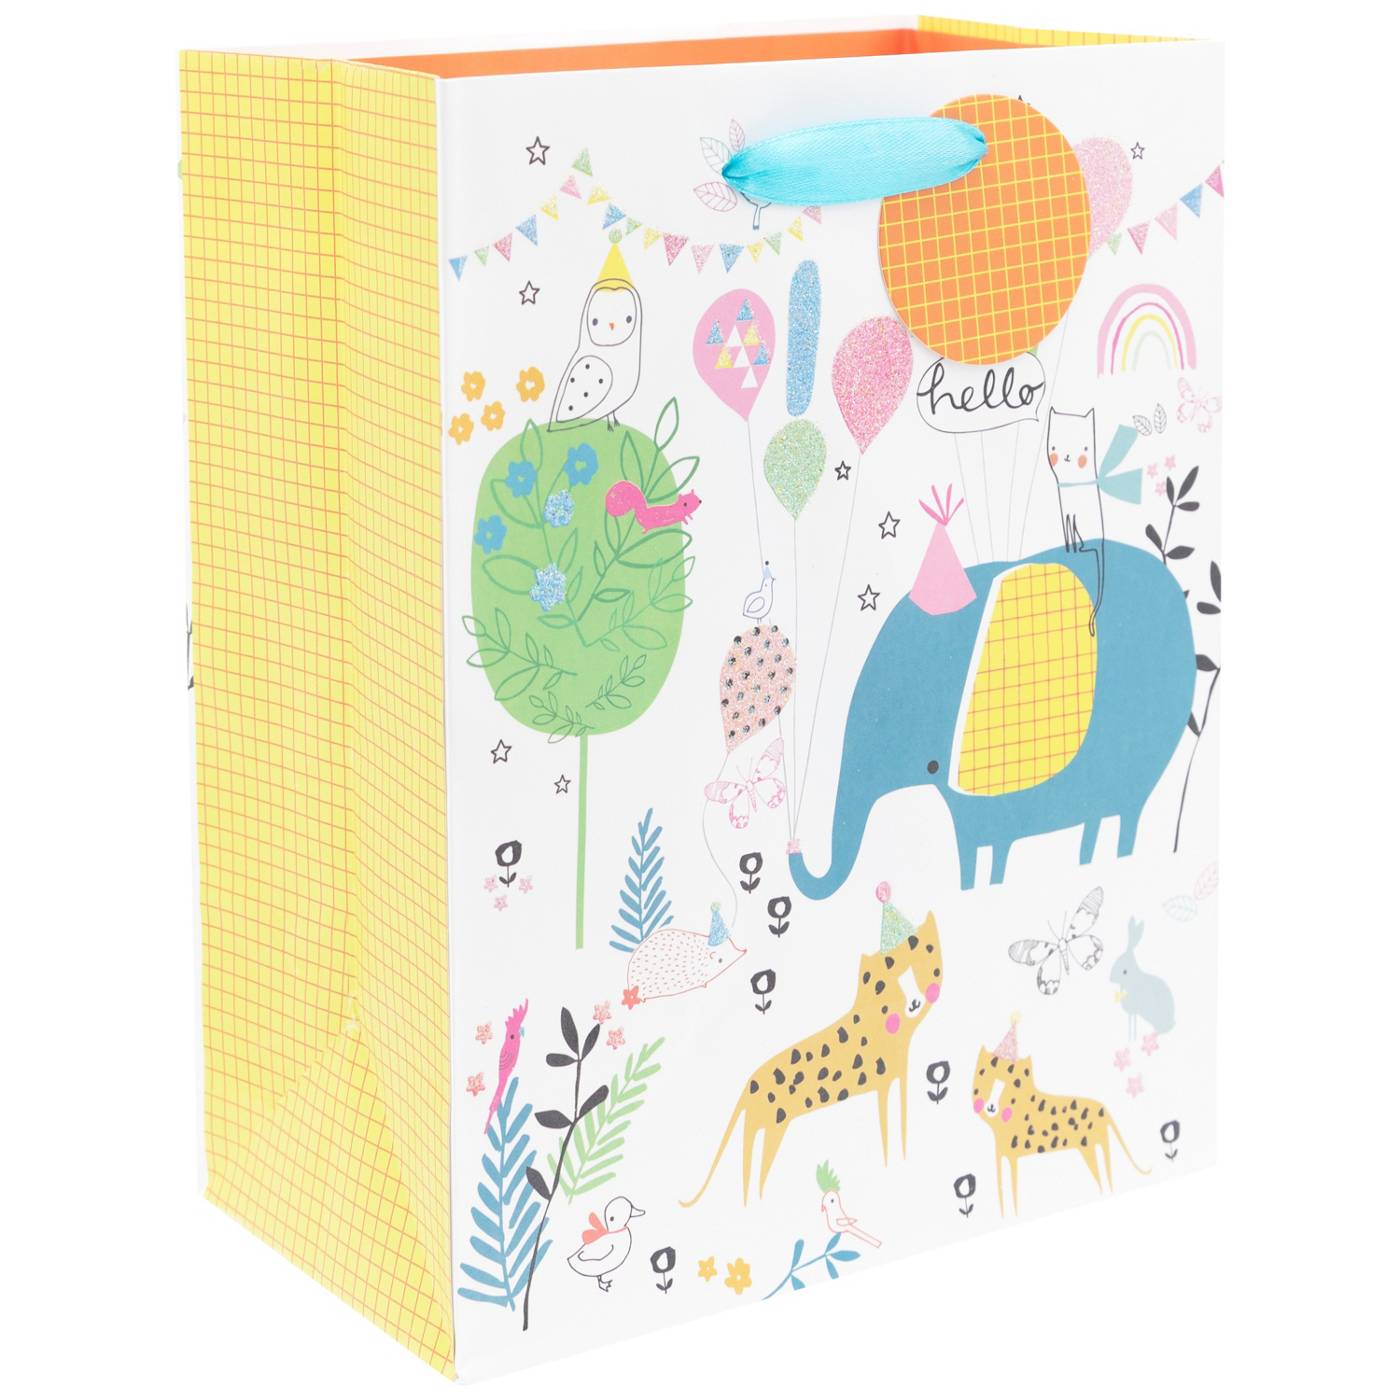 IG Design Party Animals Paper Gift Bag; image 2 of 2